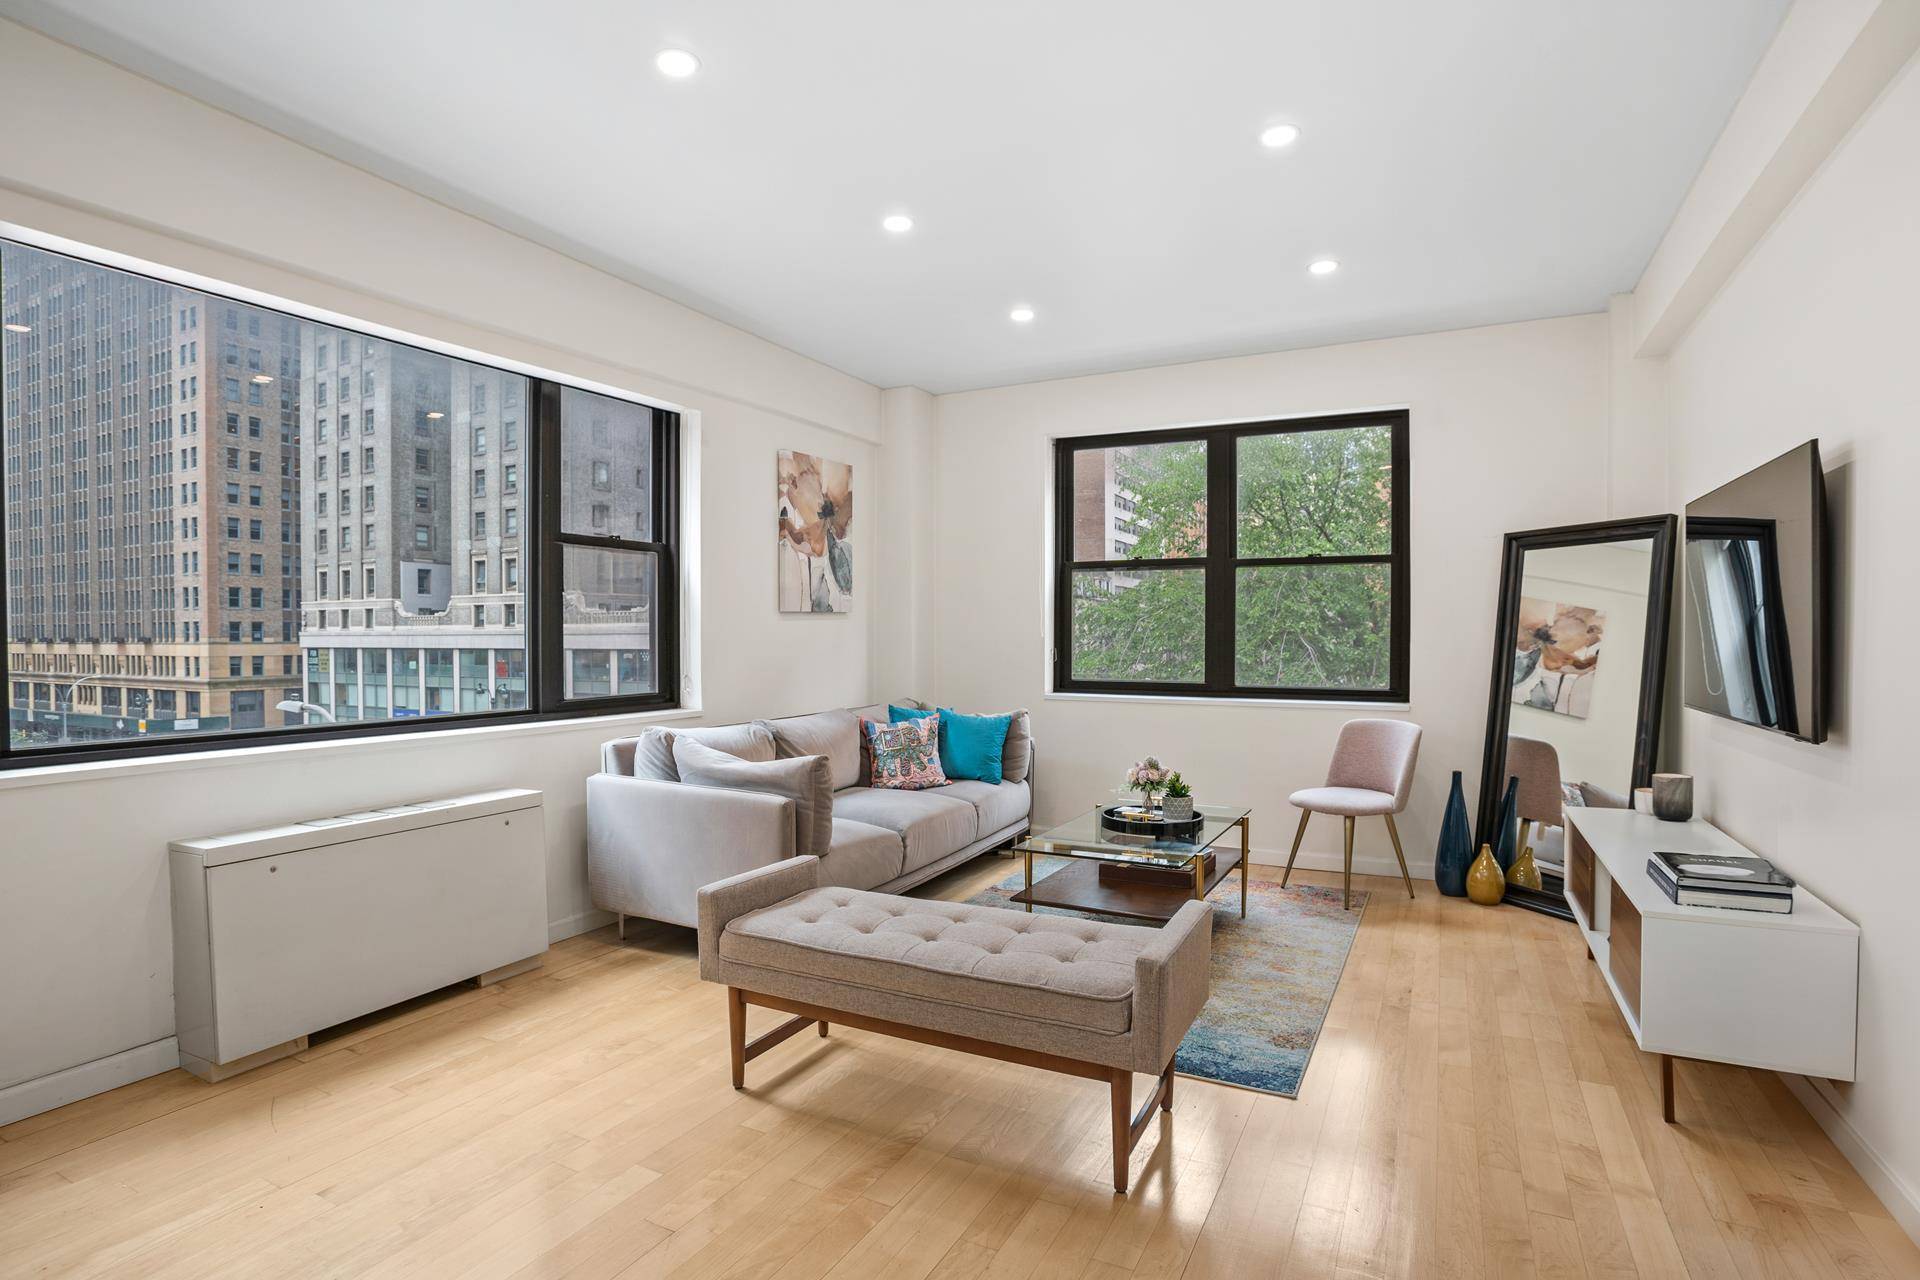 Enjoy the allure of this exquisite 690 square foot One Bedroom Apartment nestled in the vibrant heart of Midtown Manhattan.